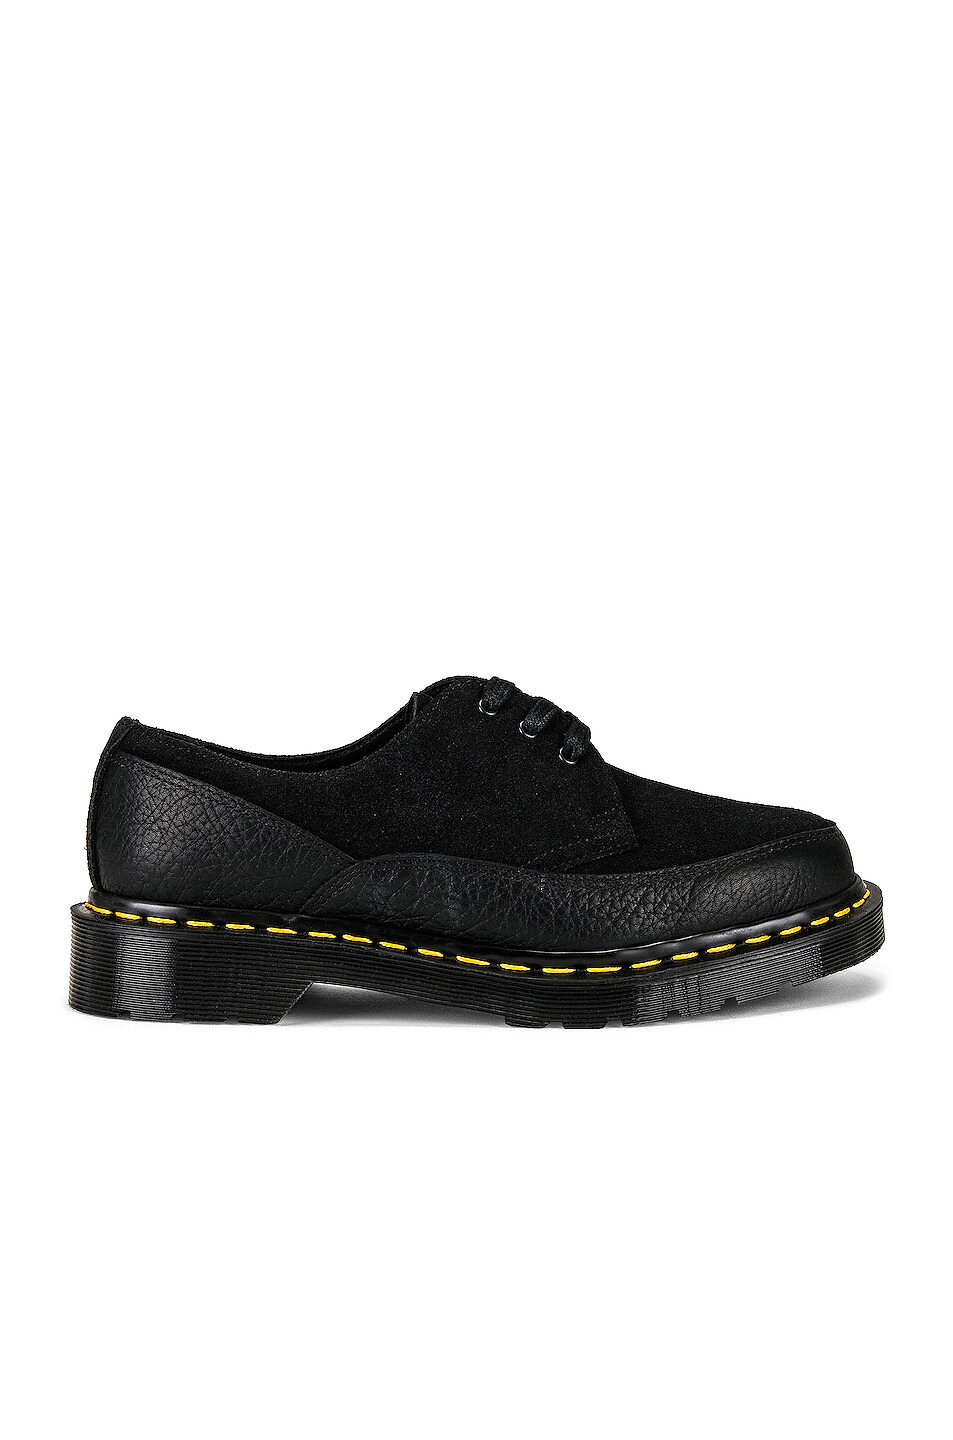 Dr. Martens Made in England 1461 Guard in Black | FWRD